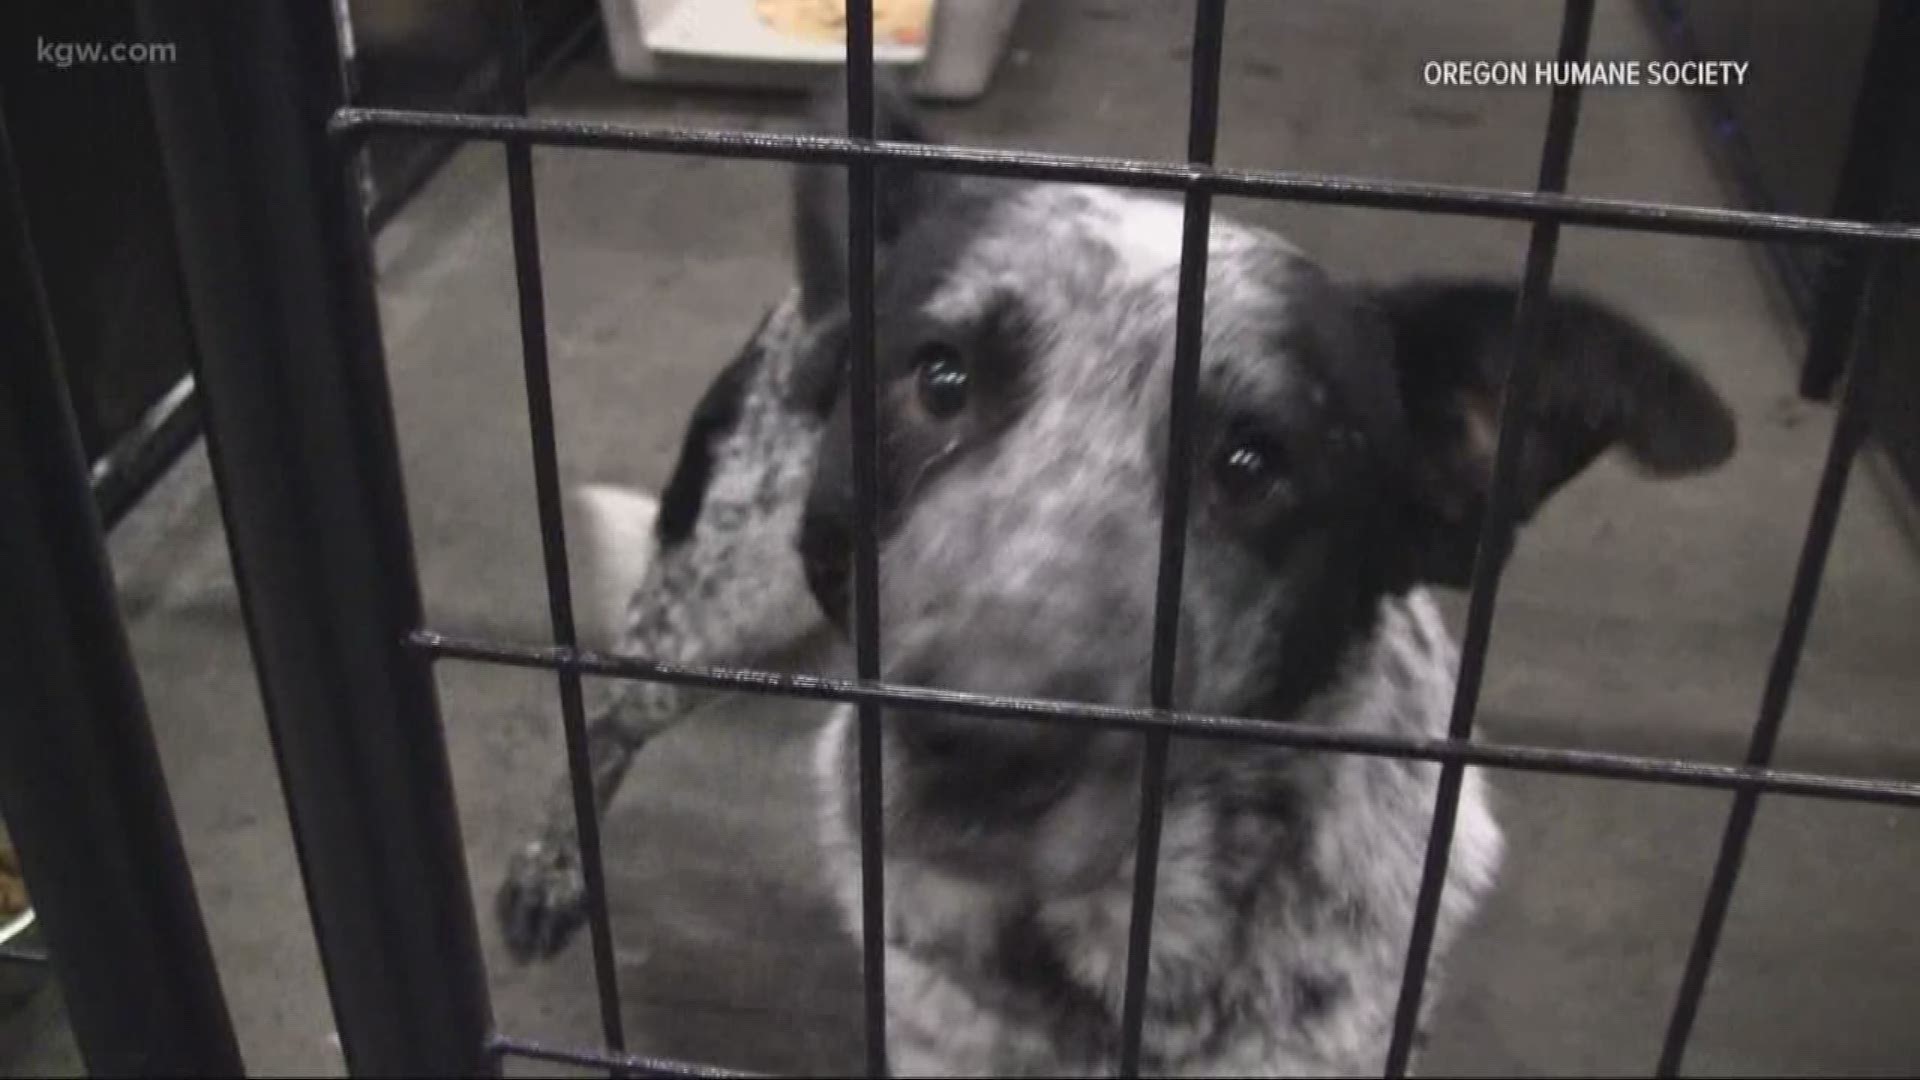 Oregon Humane Society takes in 17 new dogs